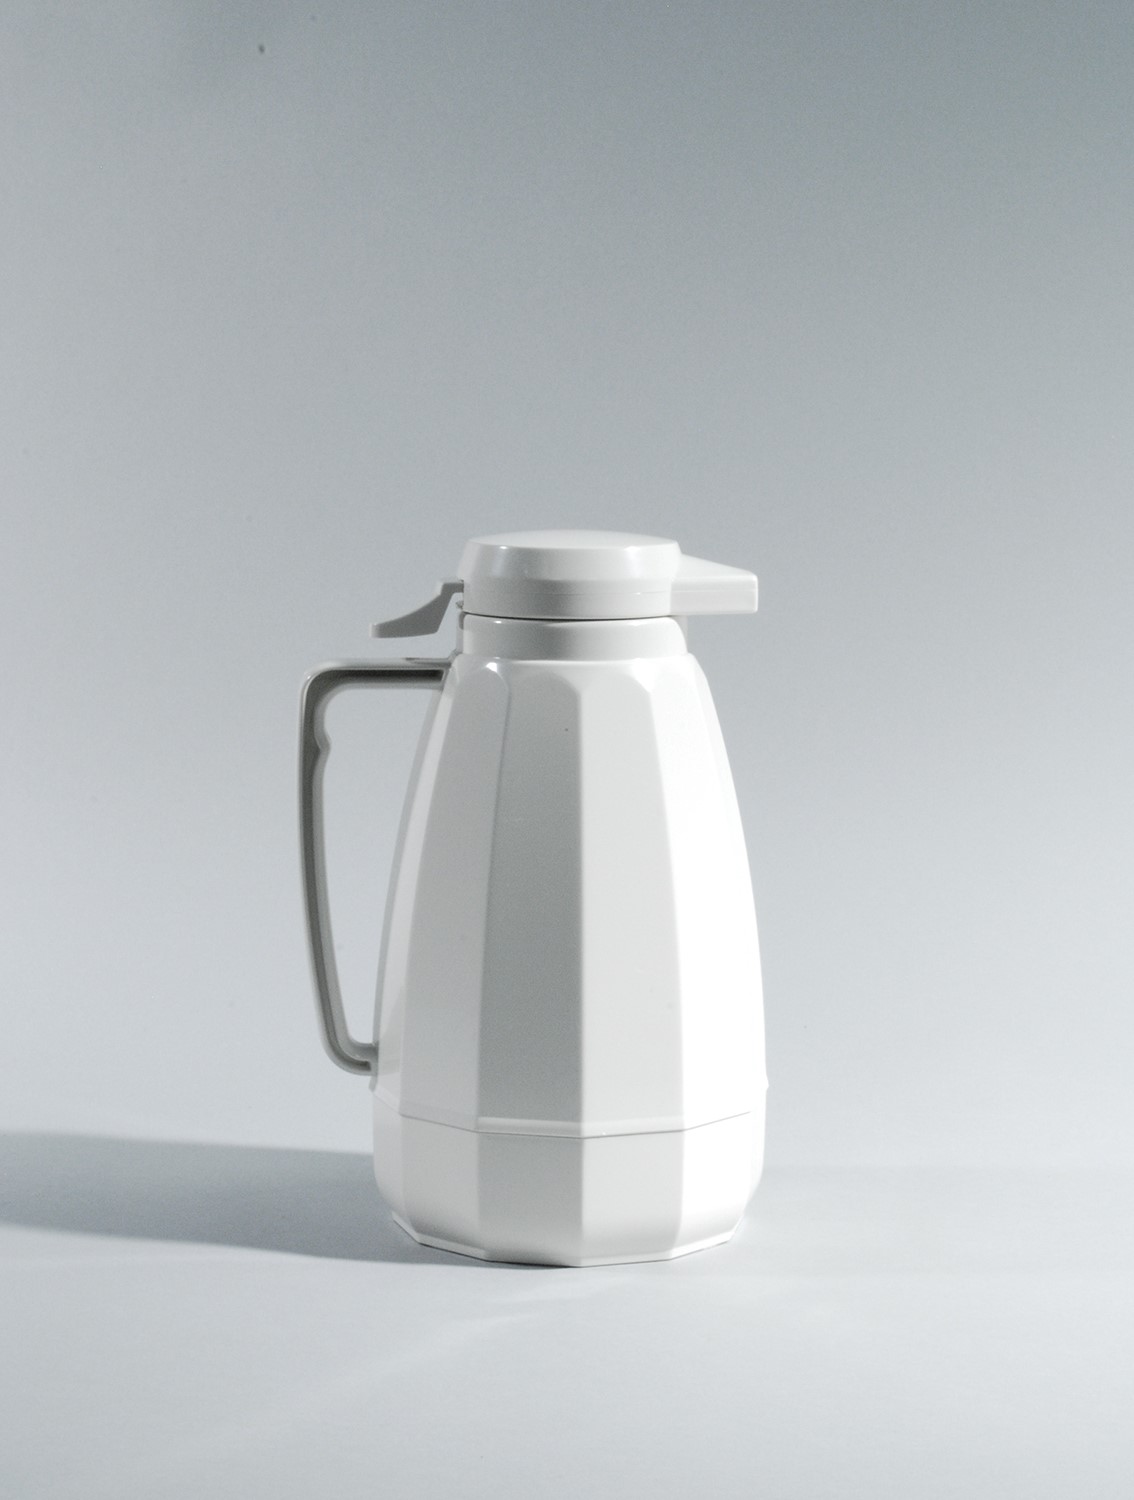 https://wcep.com/wp-content/uploads/2017/08/Coffee-Carafe-White_featured.jpg